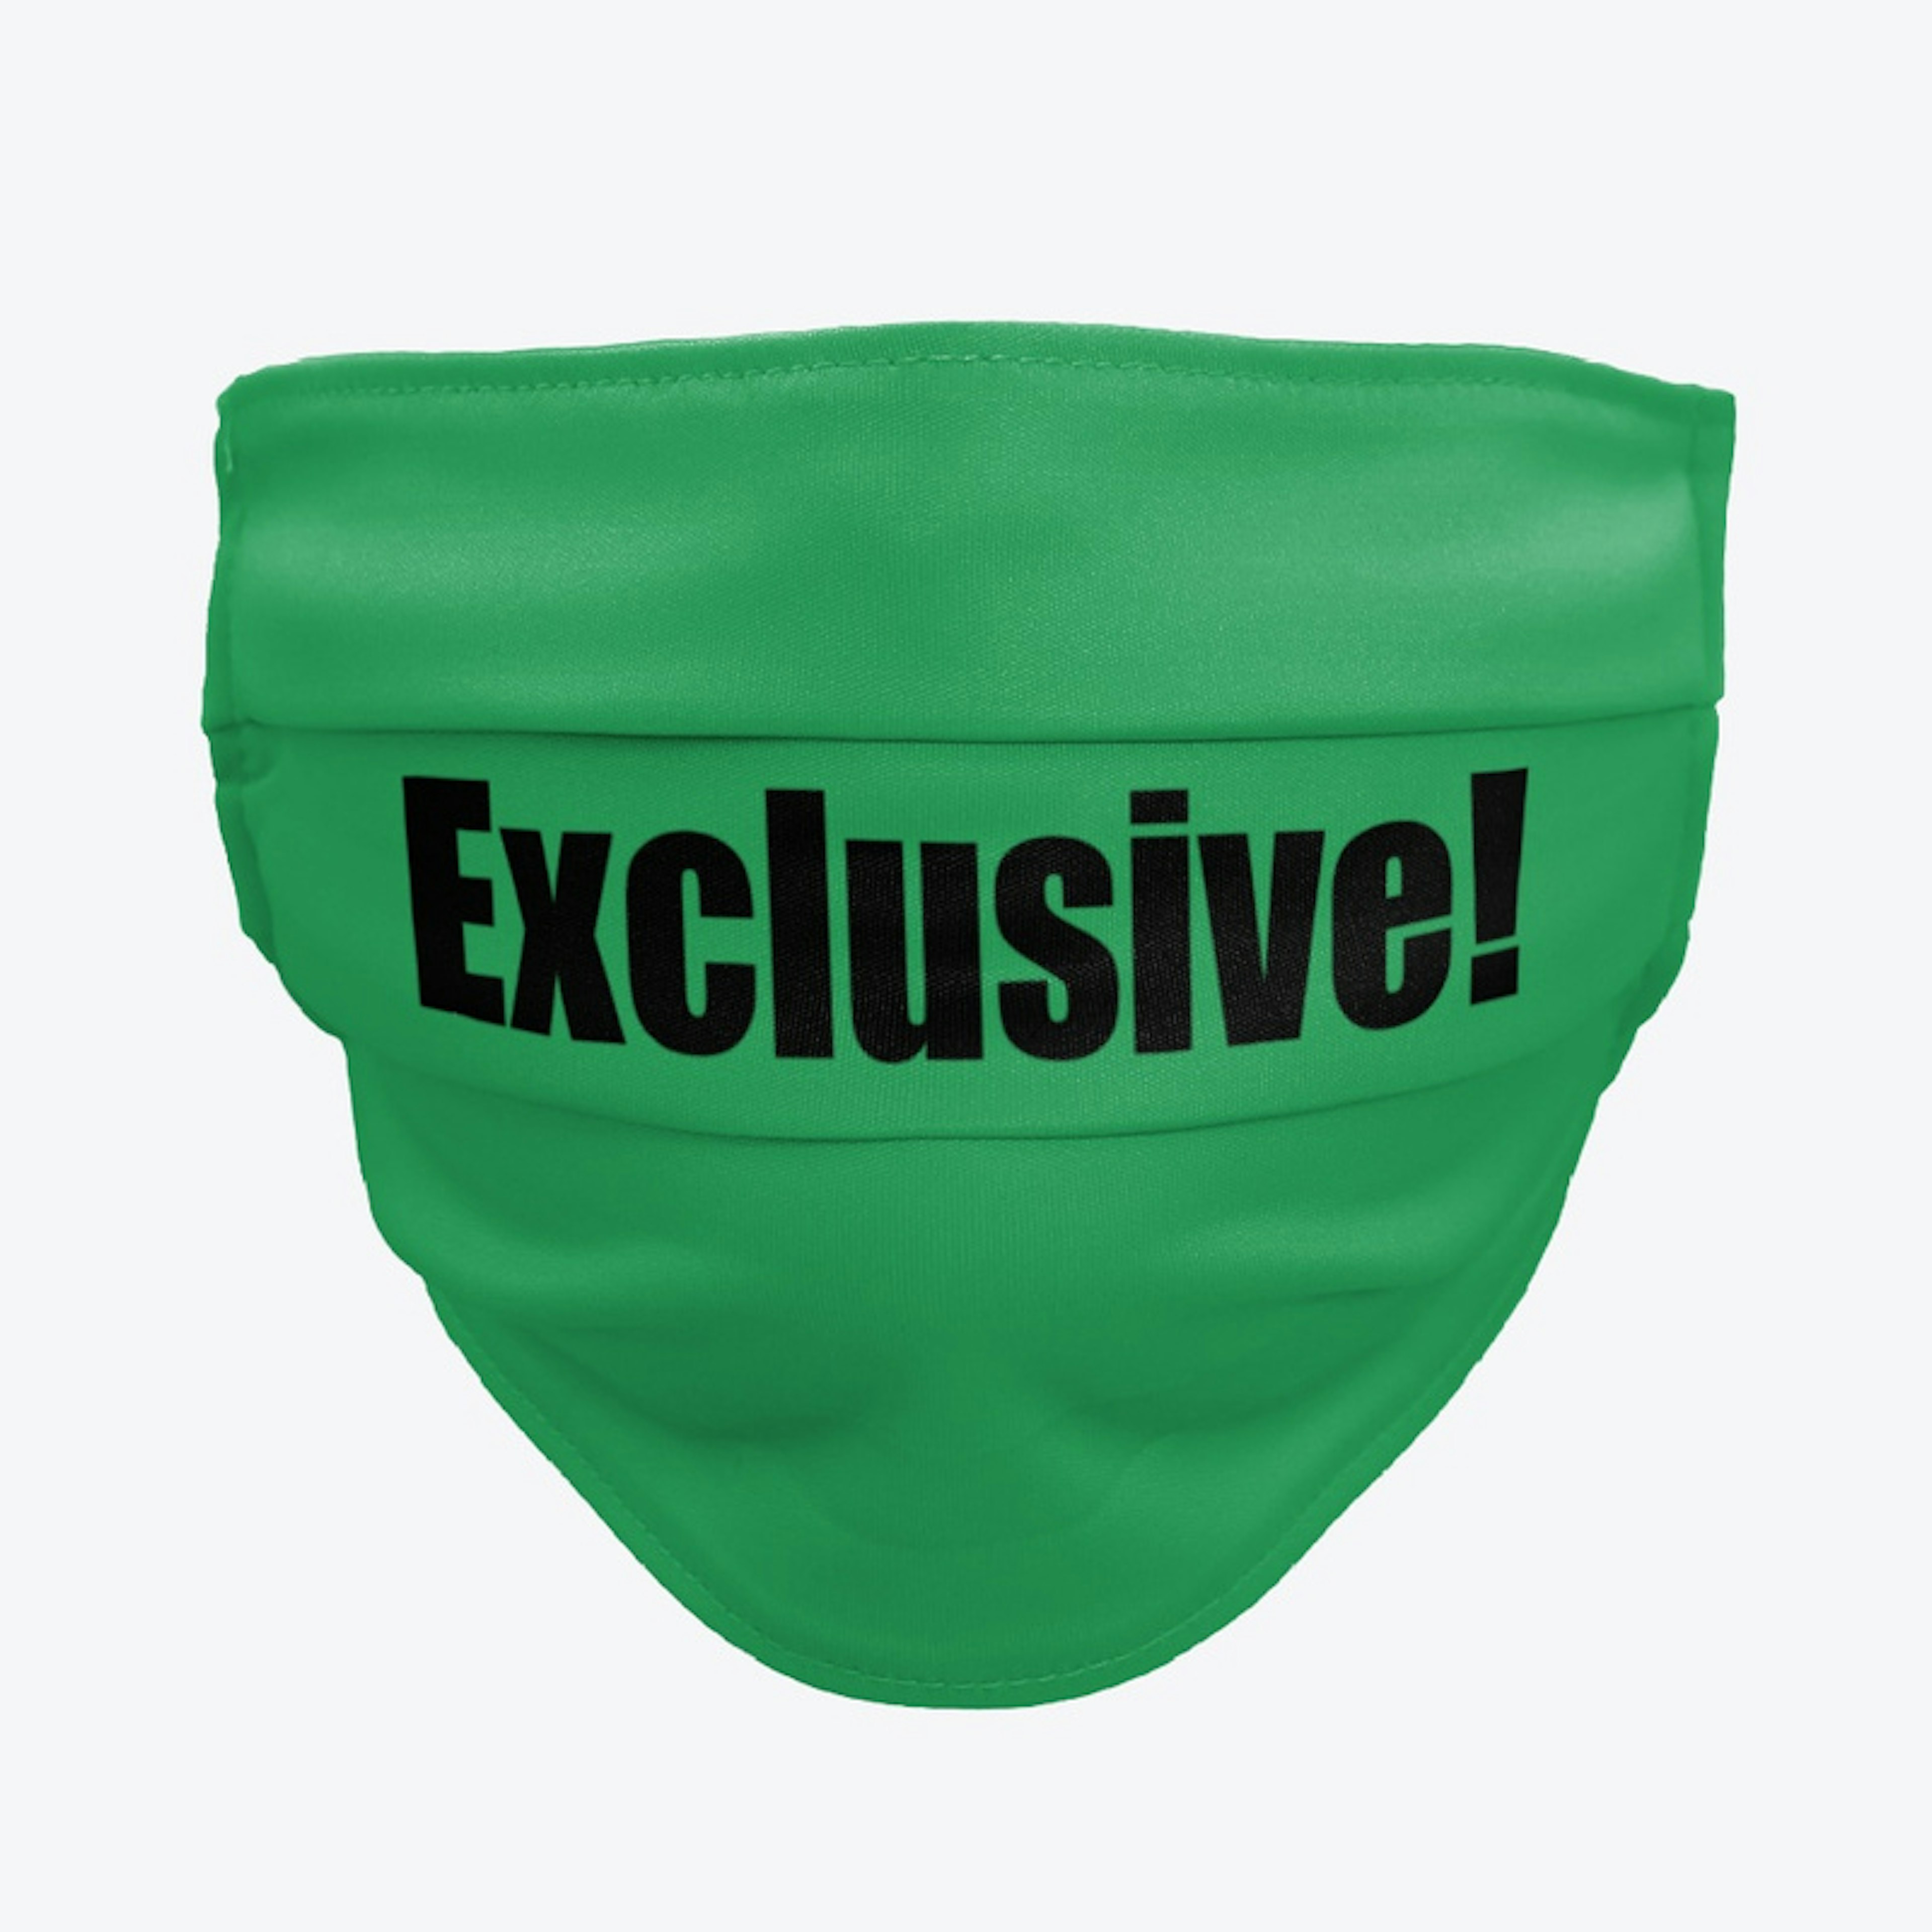 EXCLUSIVE MASK (Green or White)